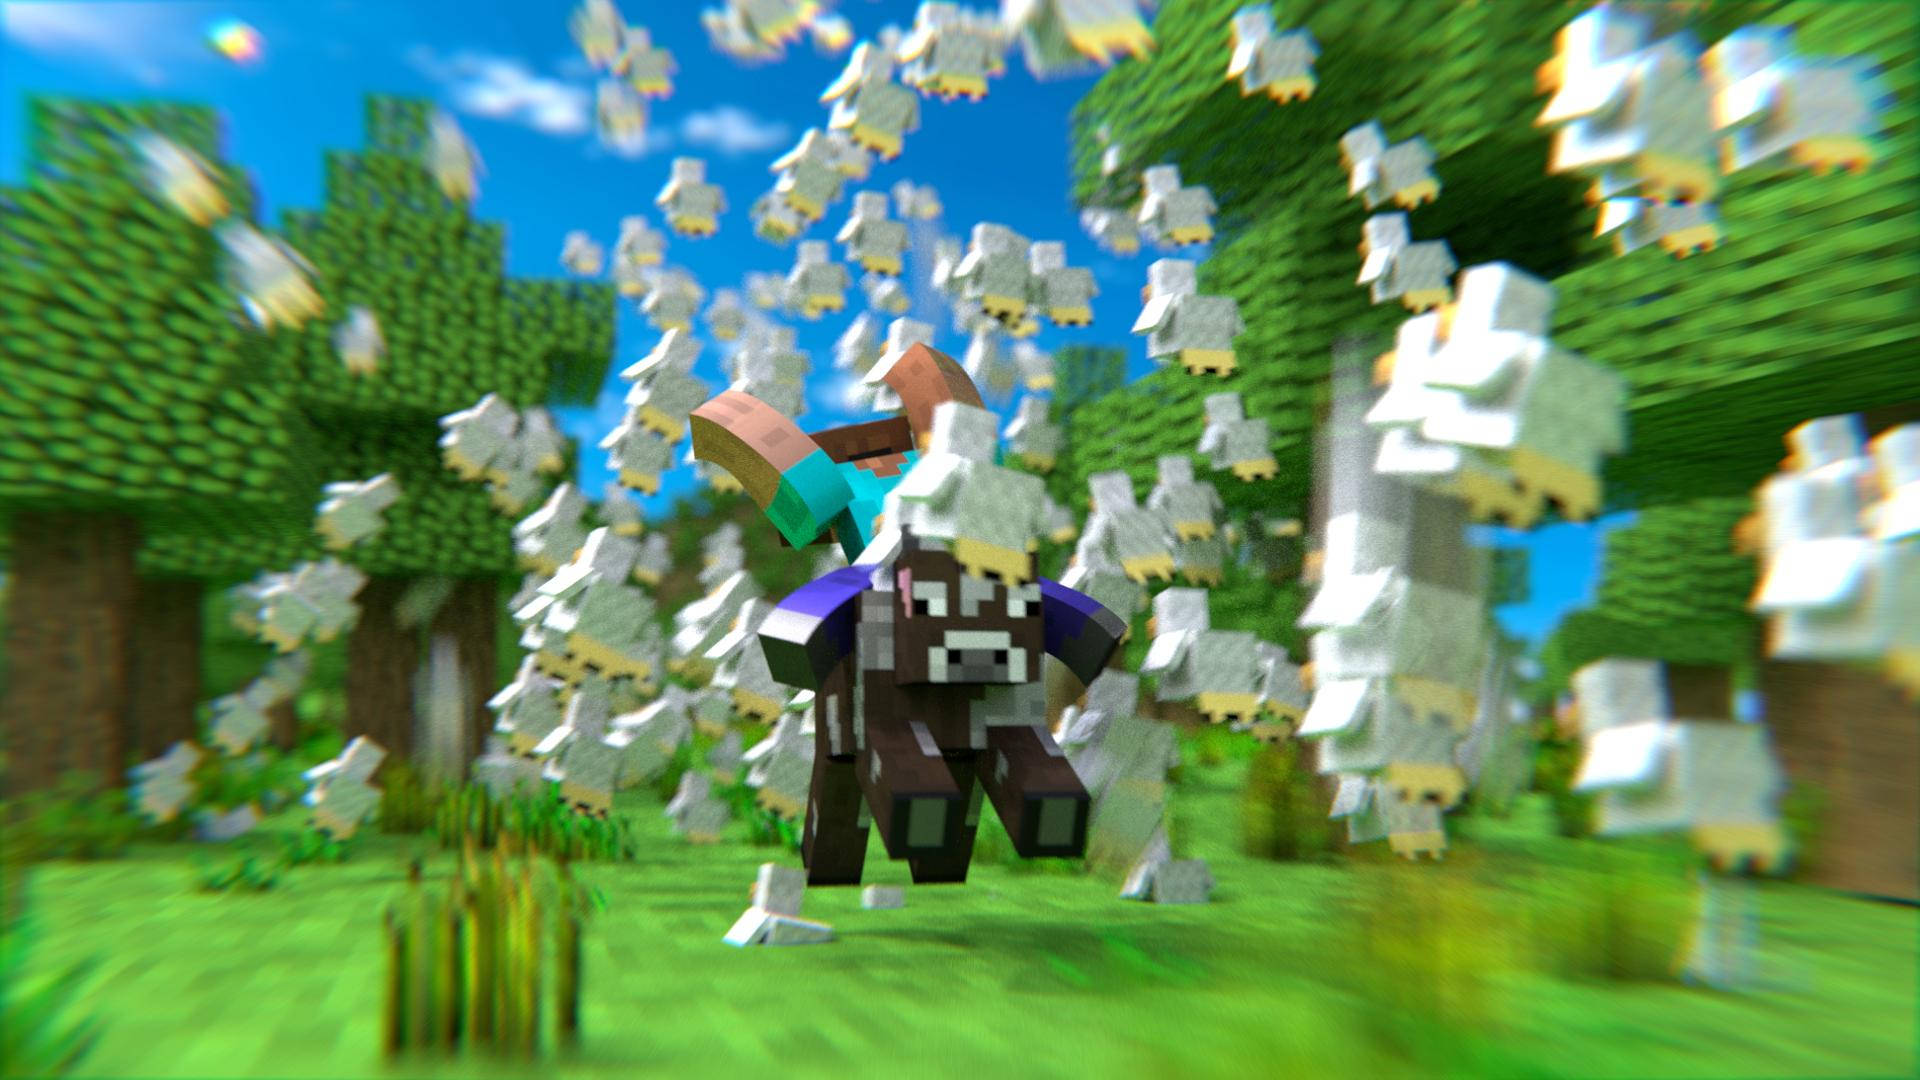 Moving Minecraft Steve With A Horse Wallpaper